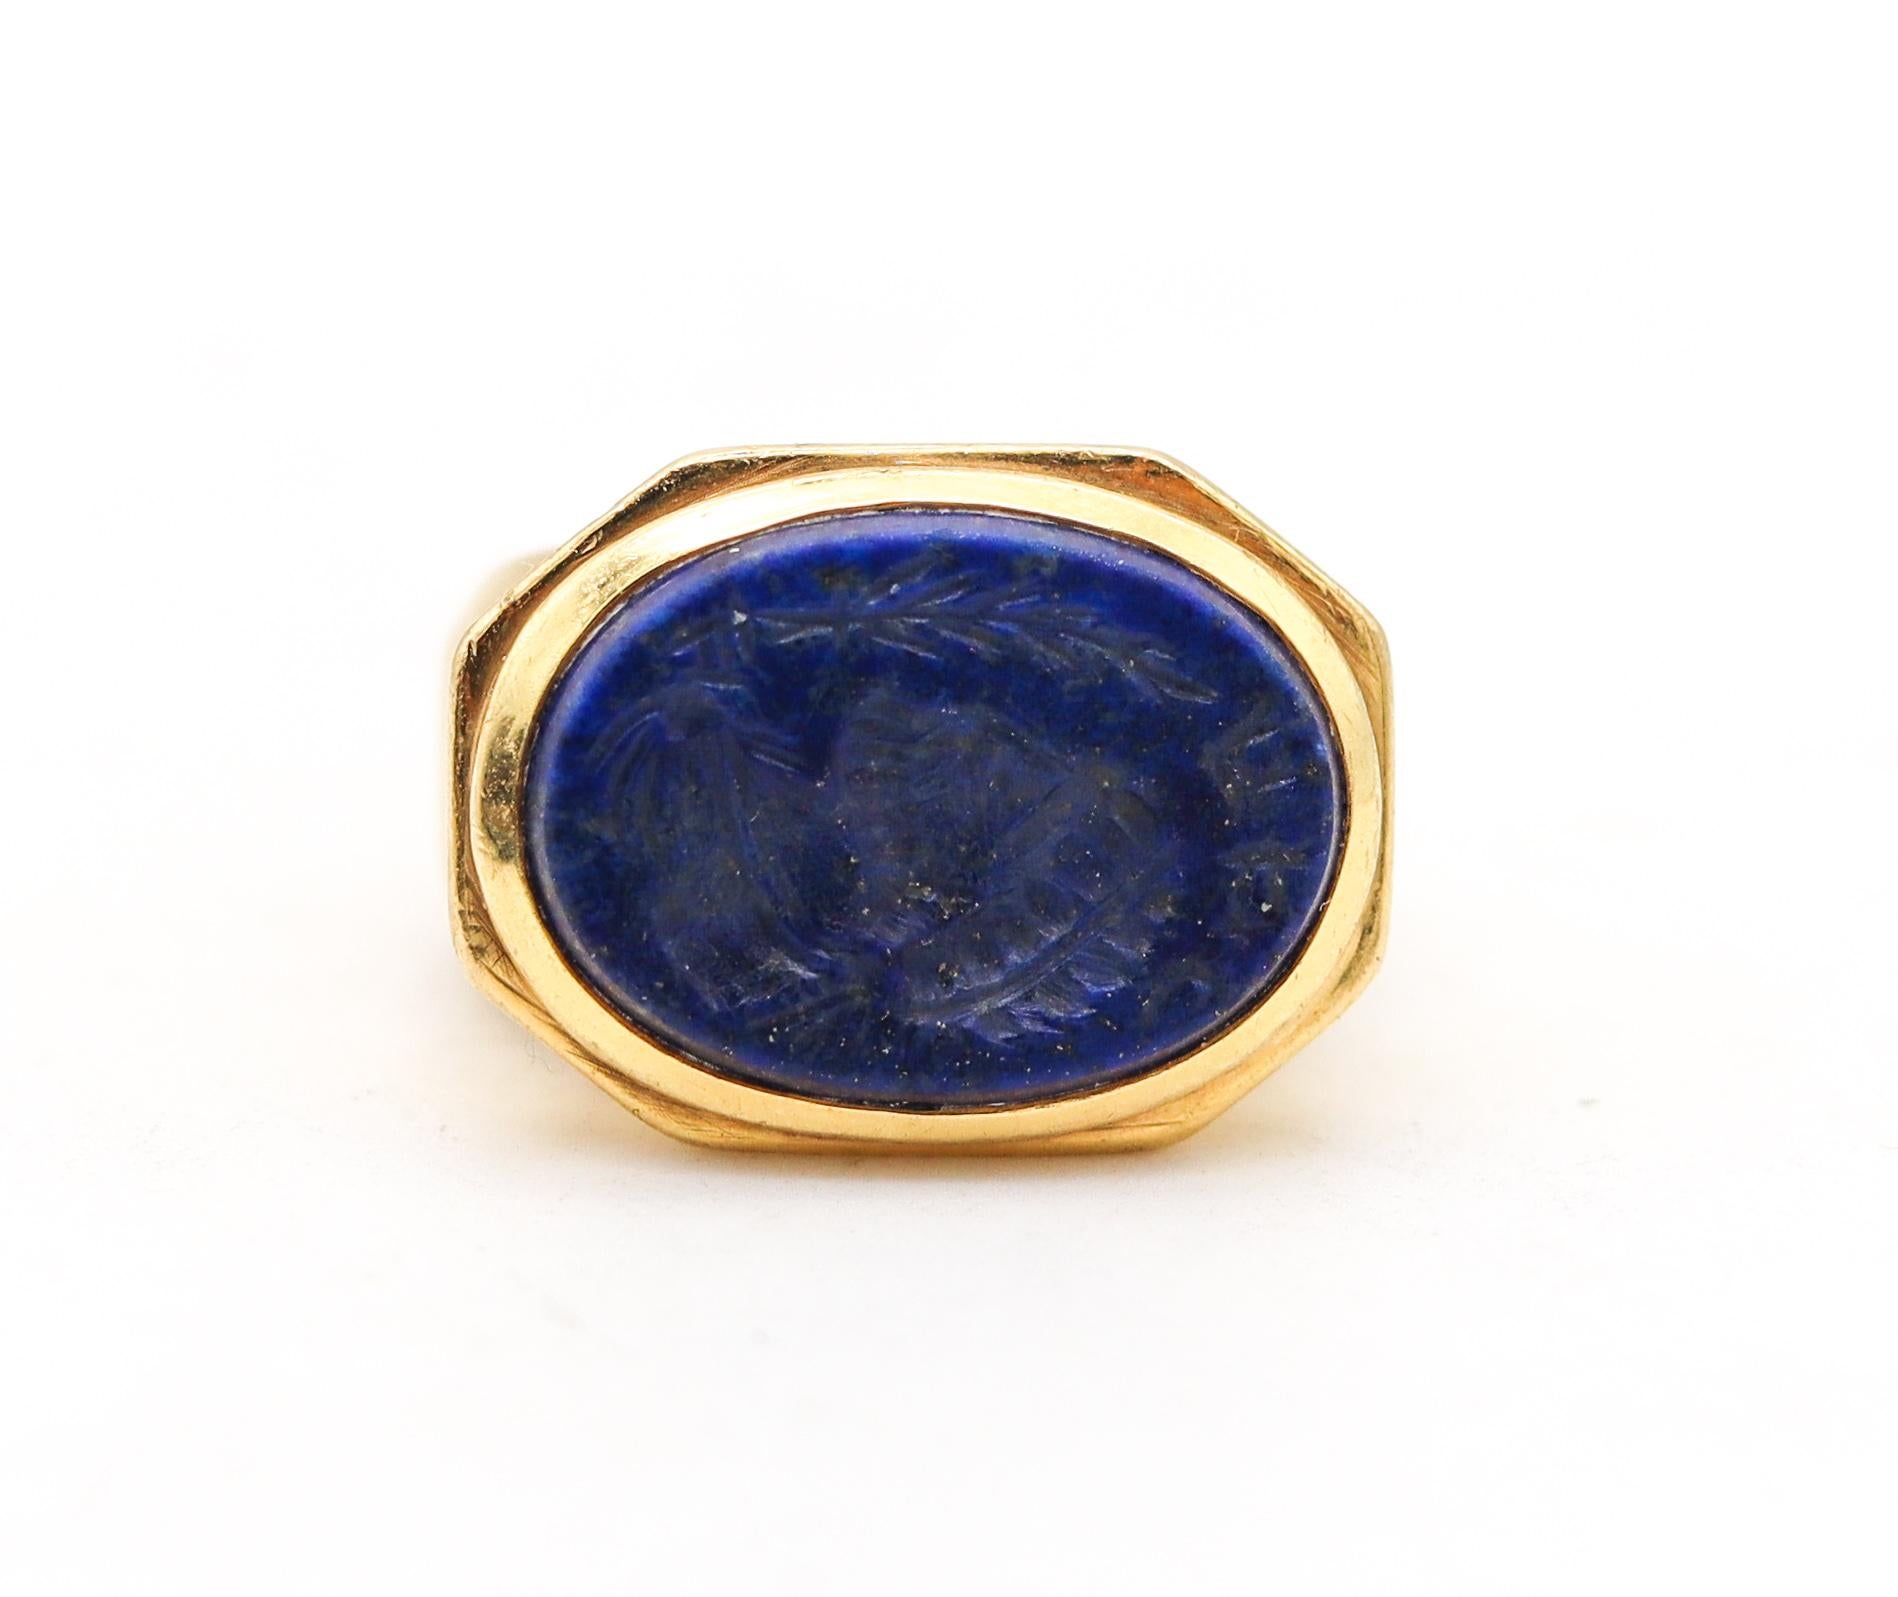 A lapis lazuli intaglio signet ring.

A very bold beautiful piece, crafted in solid 18 karat yellow gold and finished with a delicate ultra-fine satin brushing. This massive revival style signet ring was constructed in a octagonal shape with eight